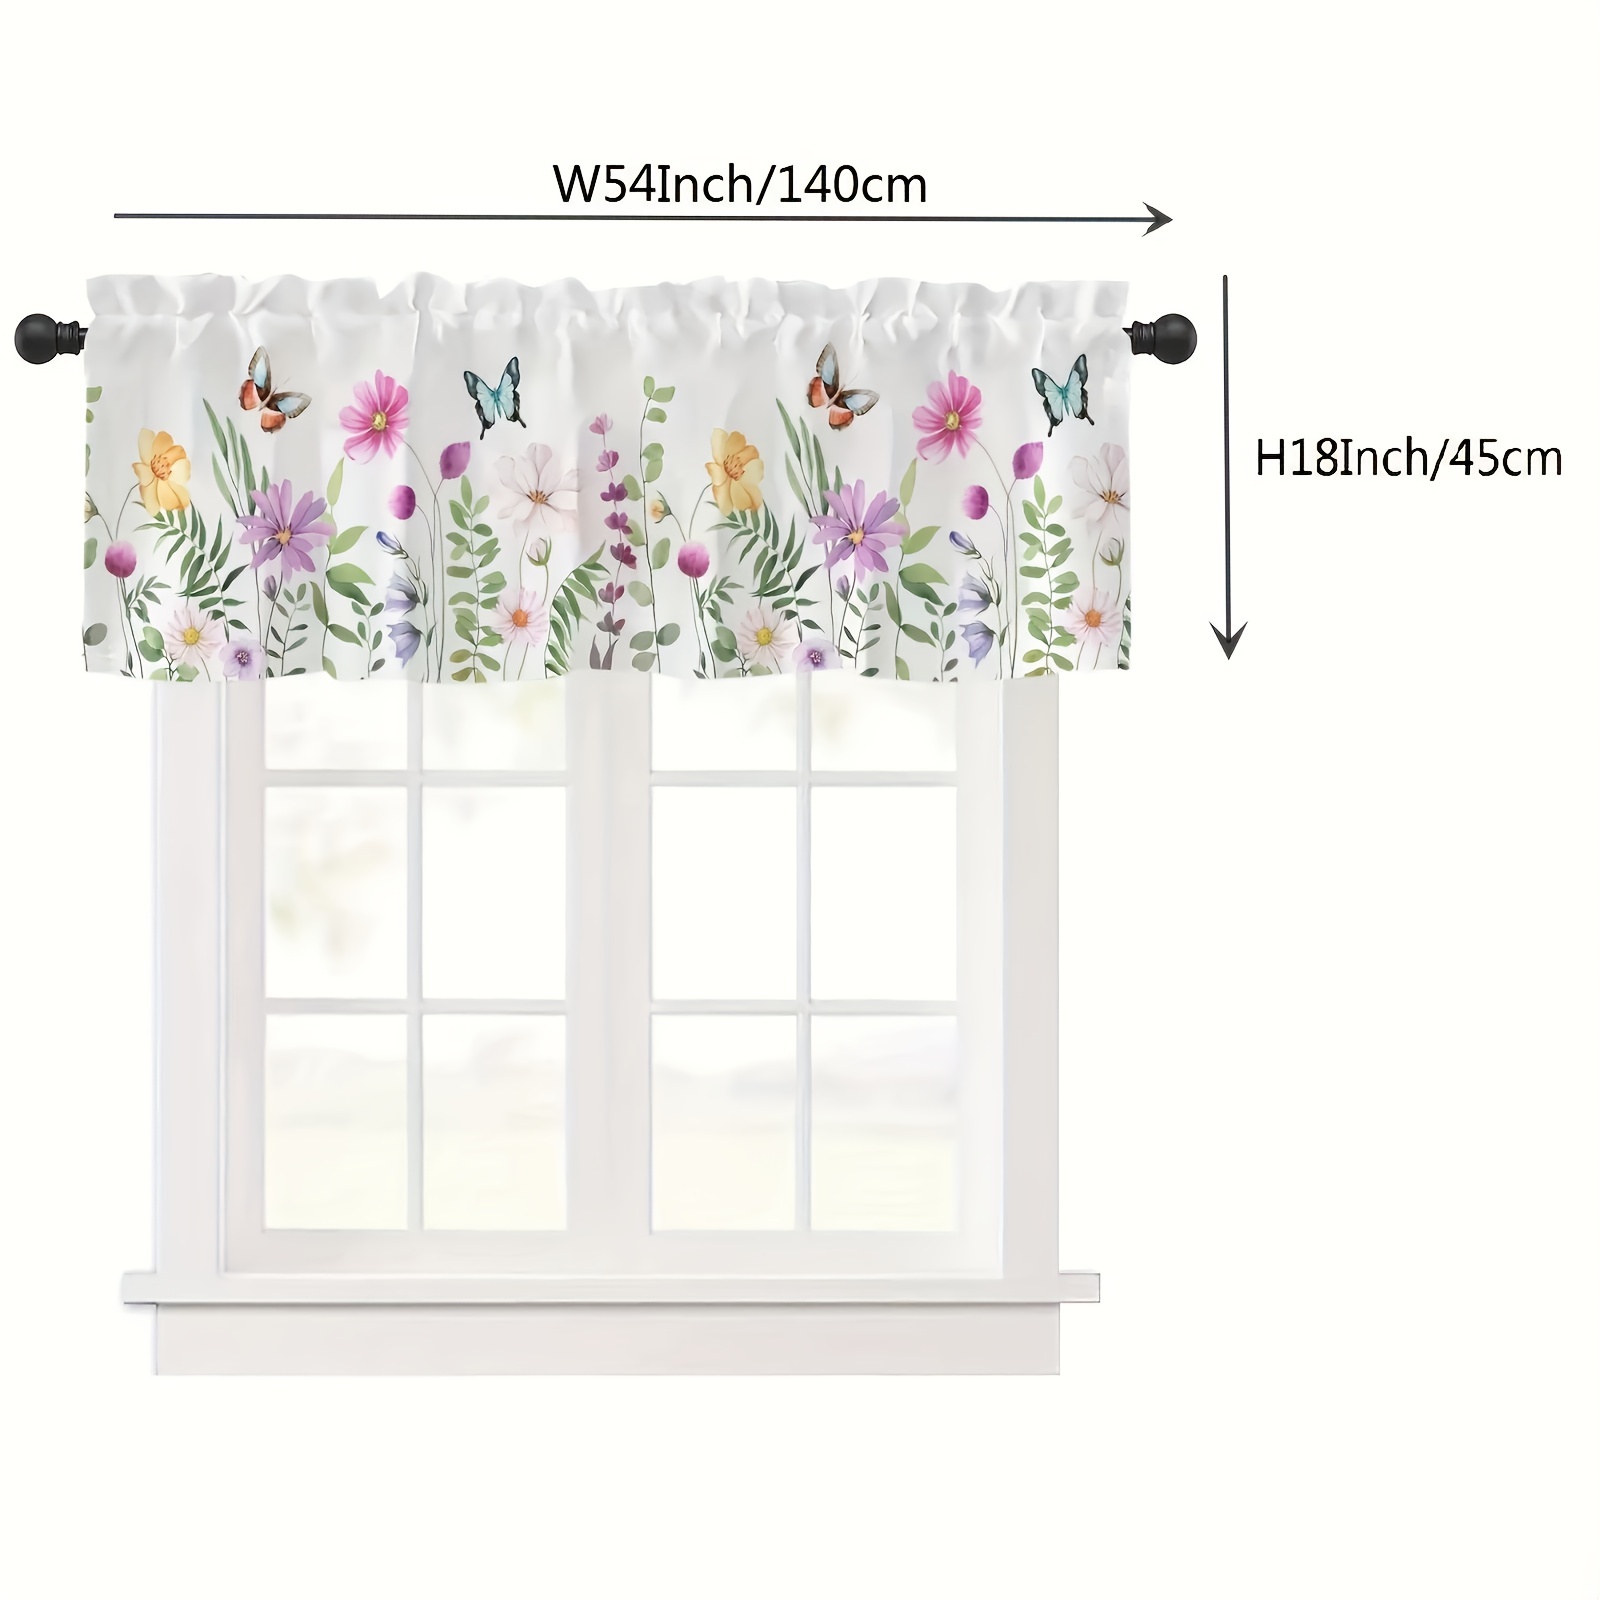 Valances for Windows, Wildflowers Spring Flower Floral Print